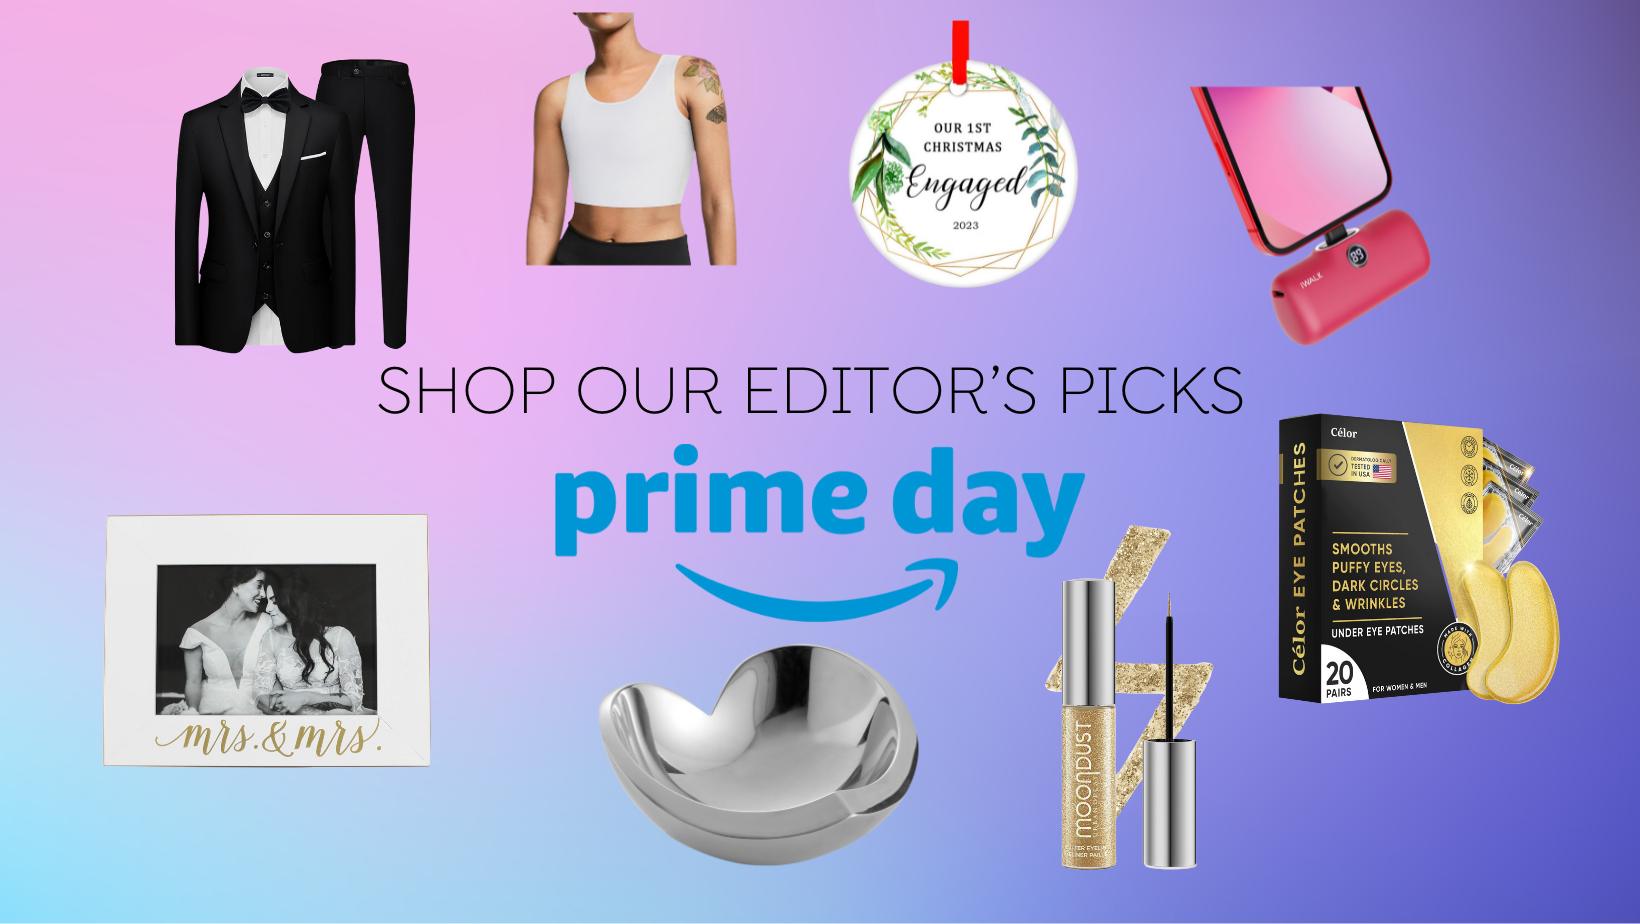 https://equallywed.com/wp-content/uploads/2023/10/amazon-prime-day-header-oct-2023.jpg